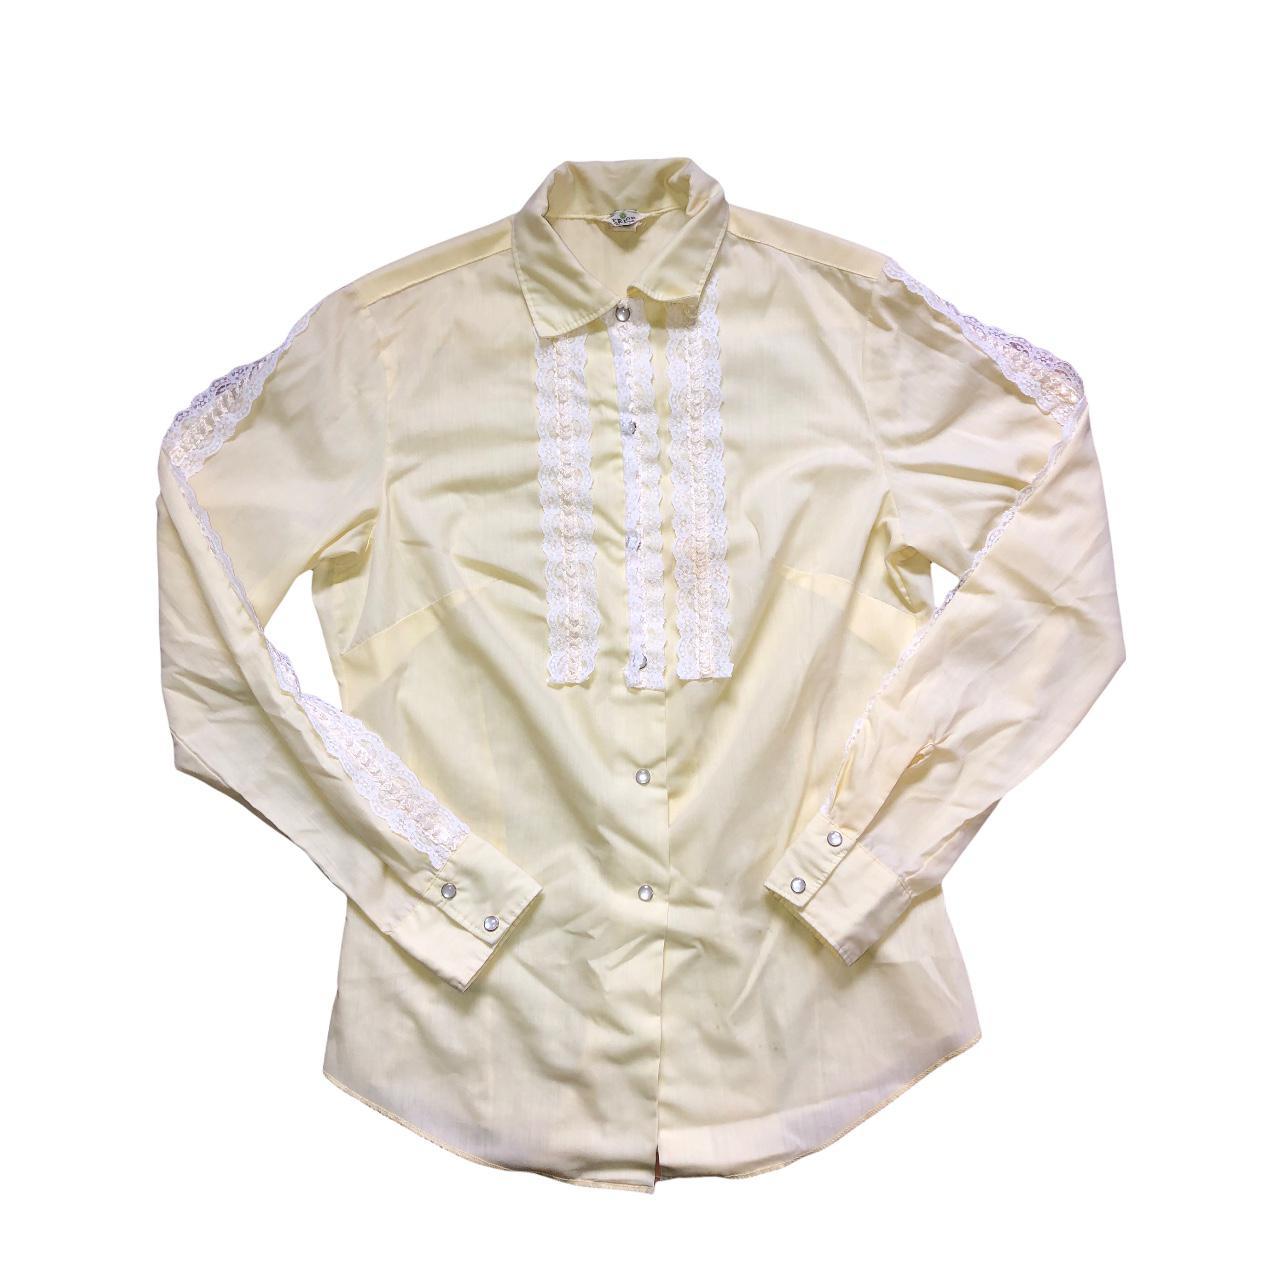 Women's Yellow and White Blouse